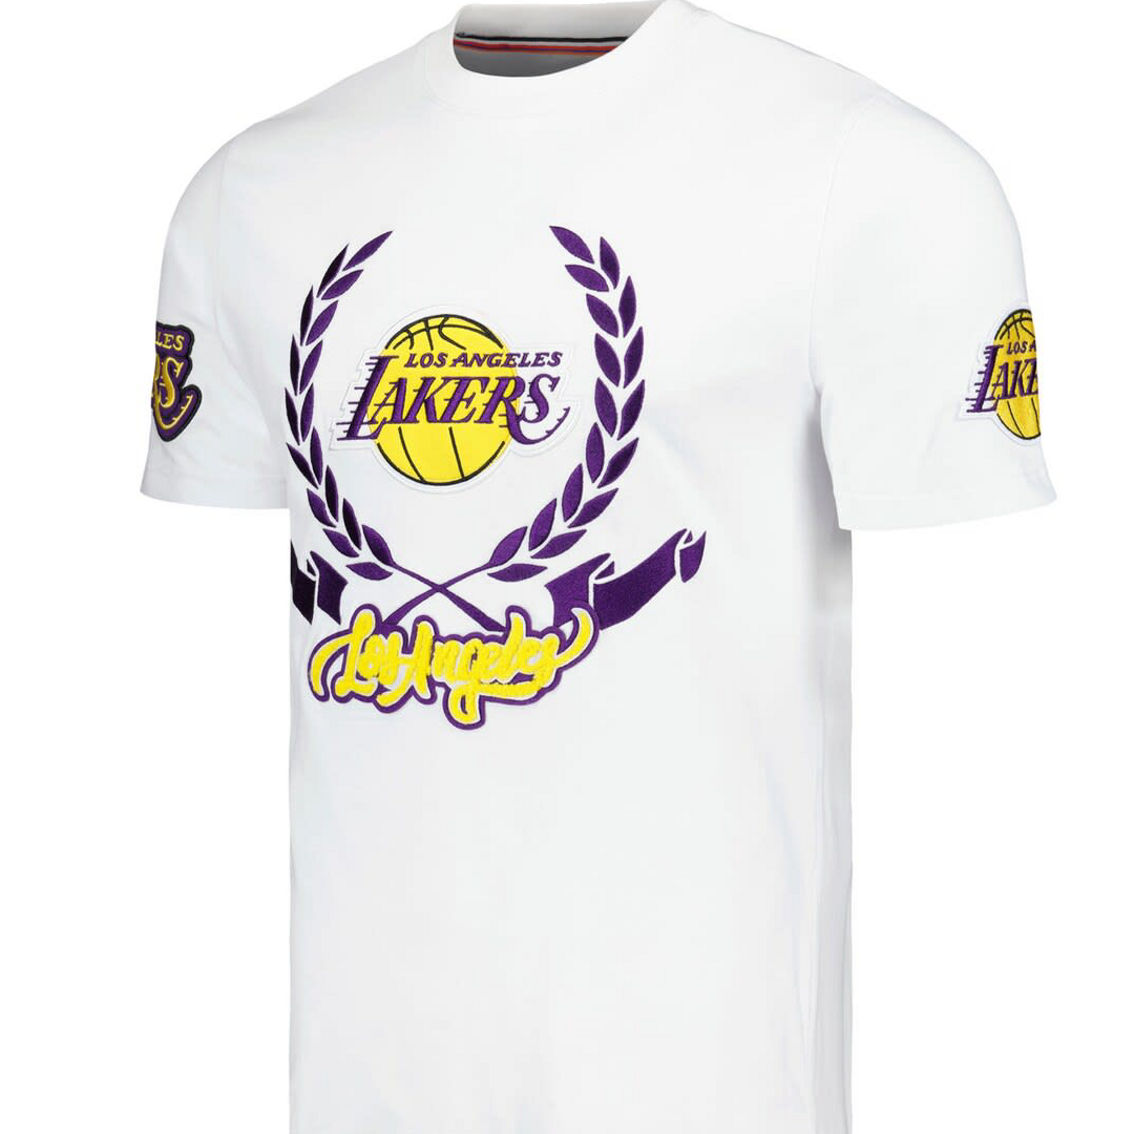 FISLL Unisex White Los Angeles Lakers Heritage Crest T-Shirt - Image 3 of 4